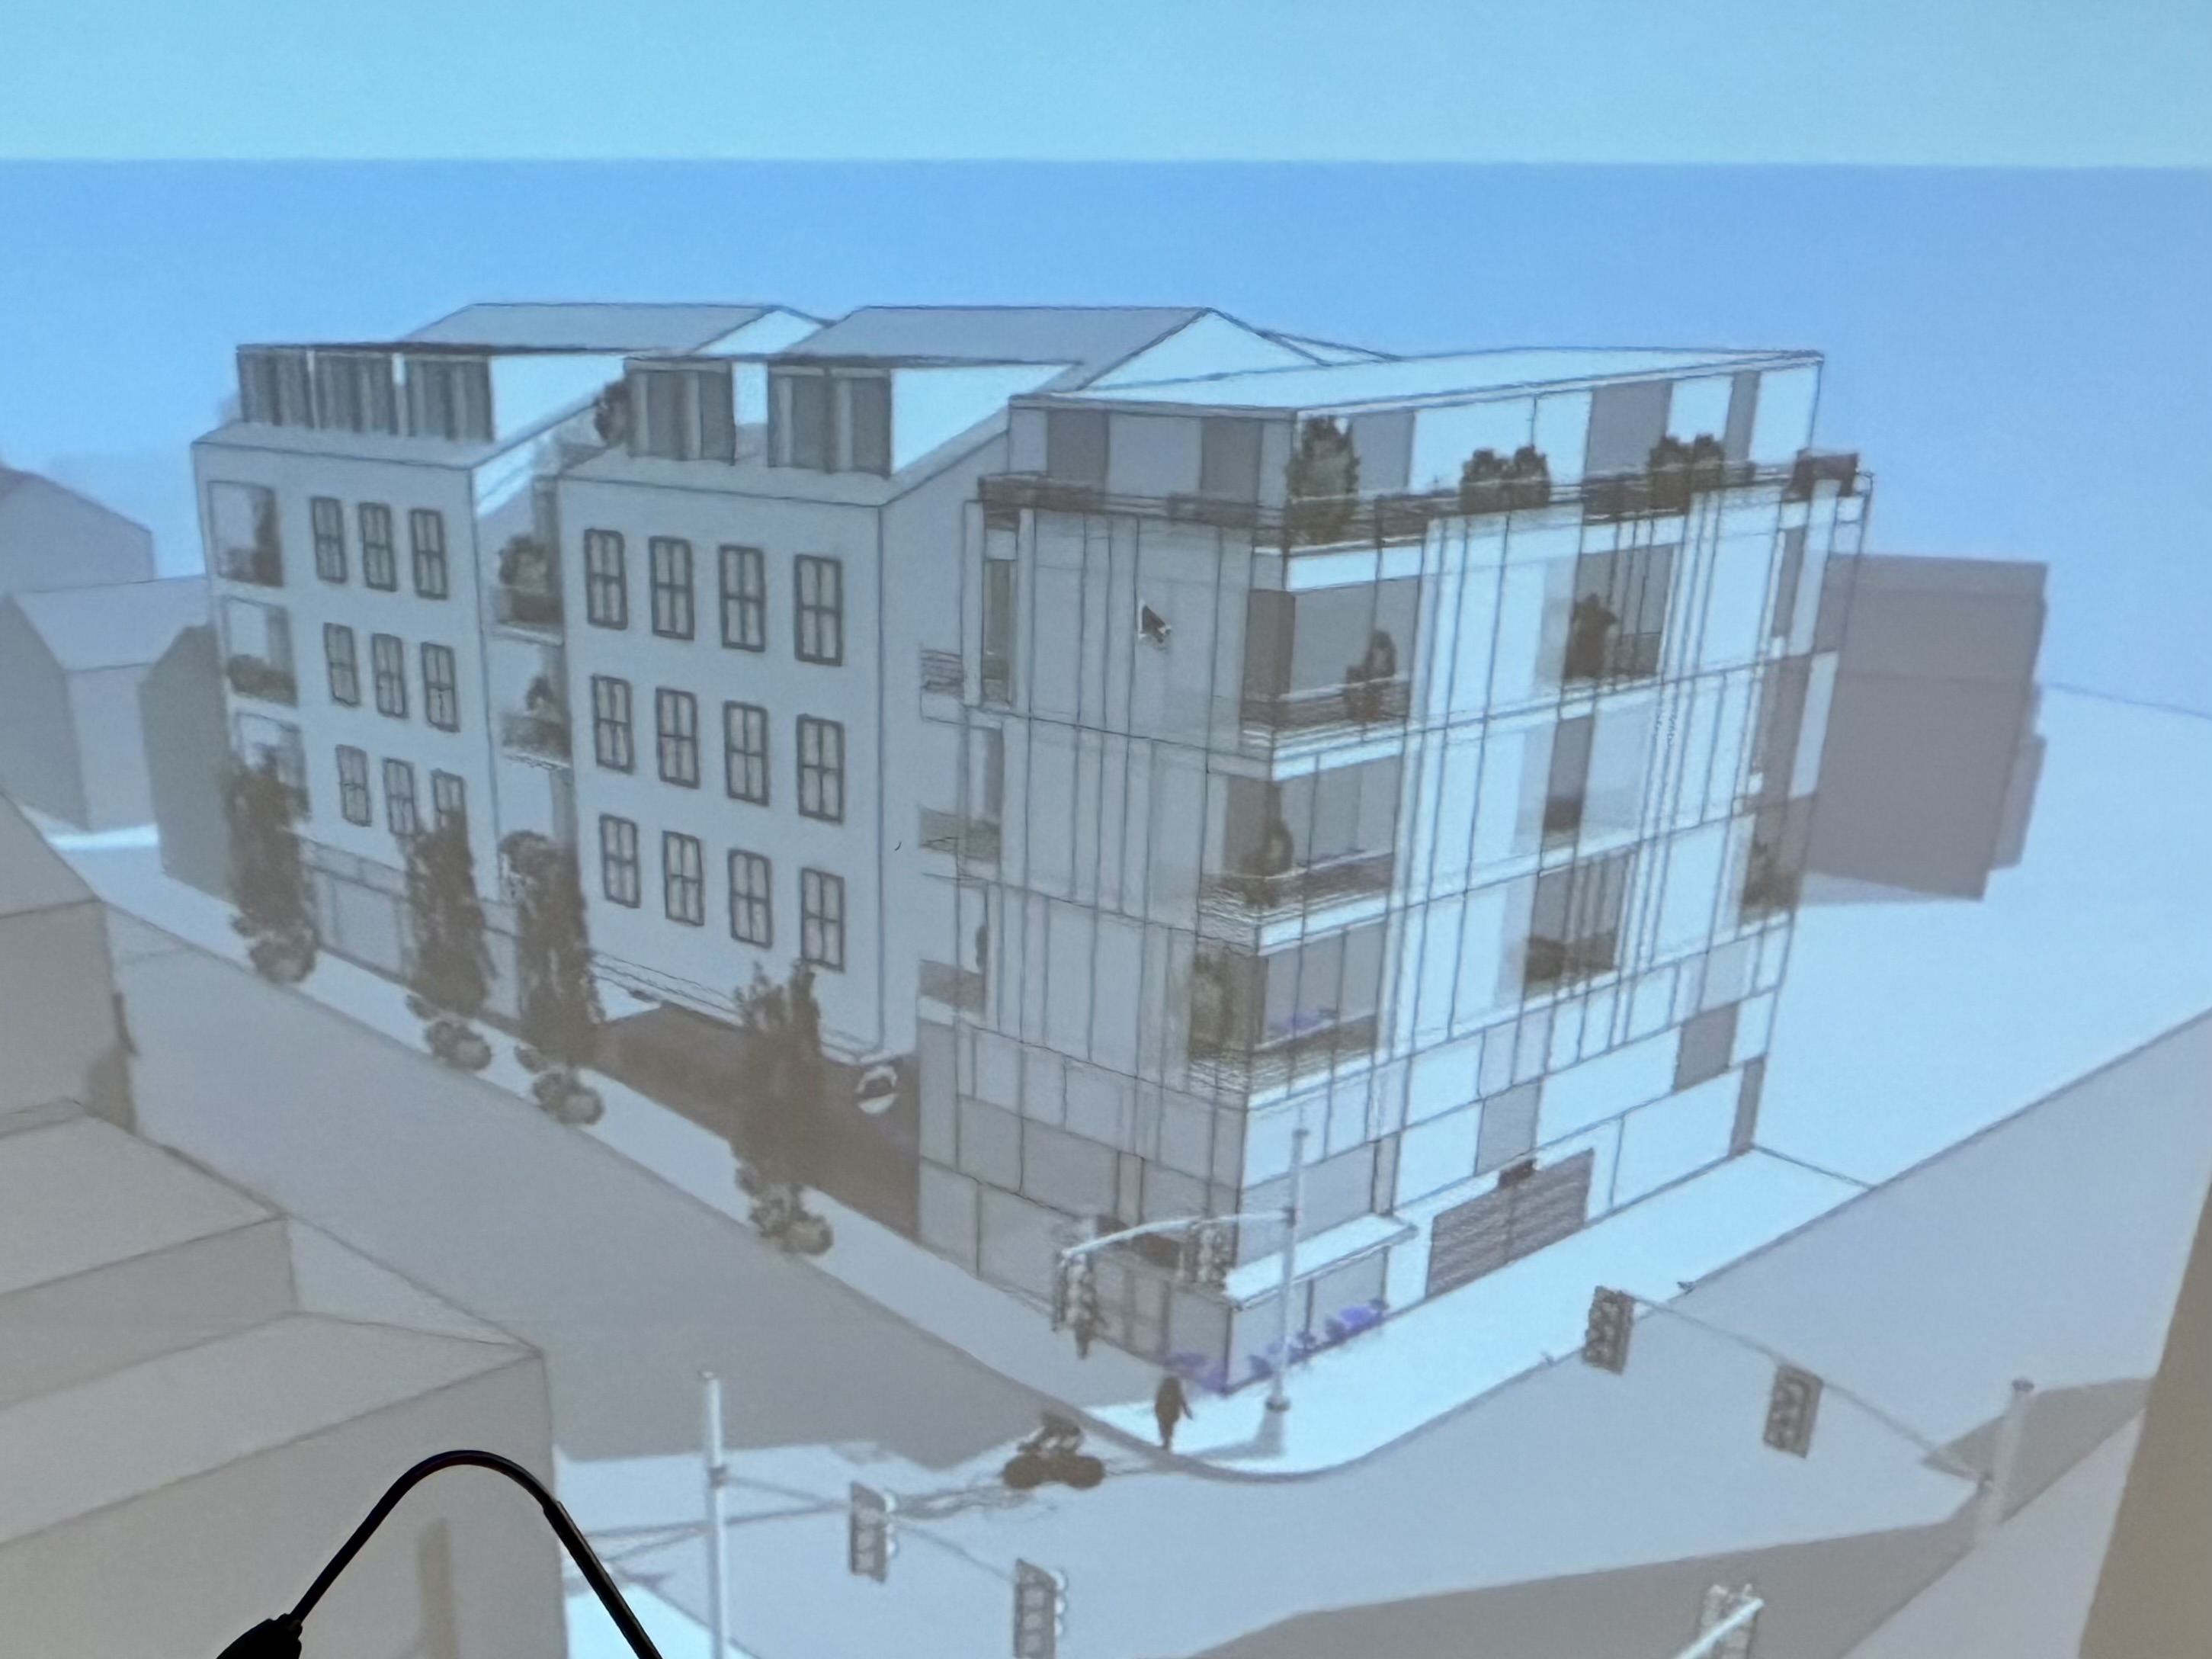 The revised designs show a building that is more broken up than the original plan. 